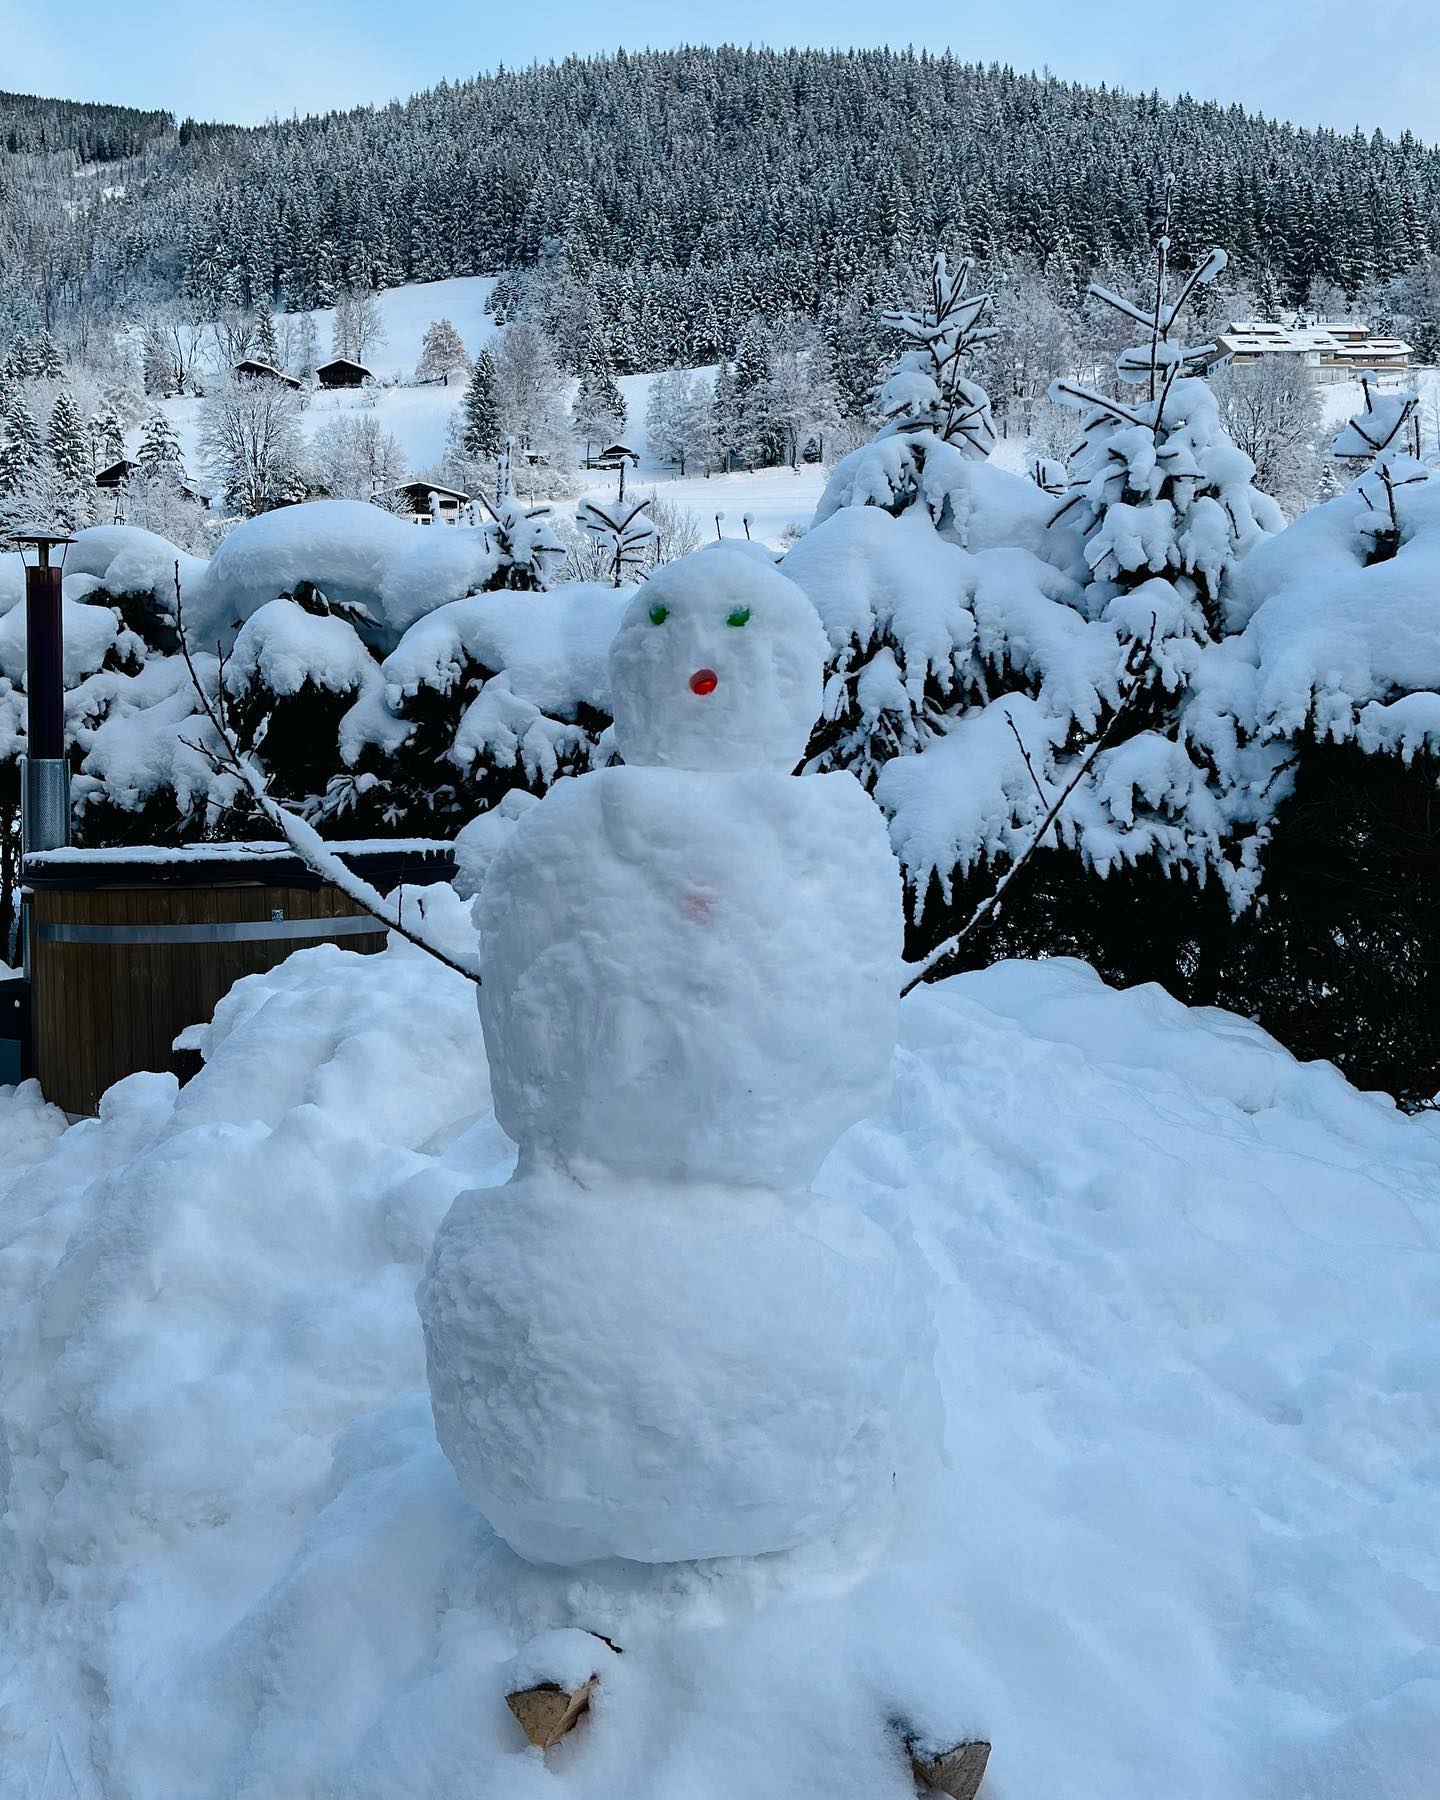 Look who we found in the garden at Chalet Zell today….snowman Bob ⛄️ #schmitten #family holidays #skichalet